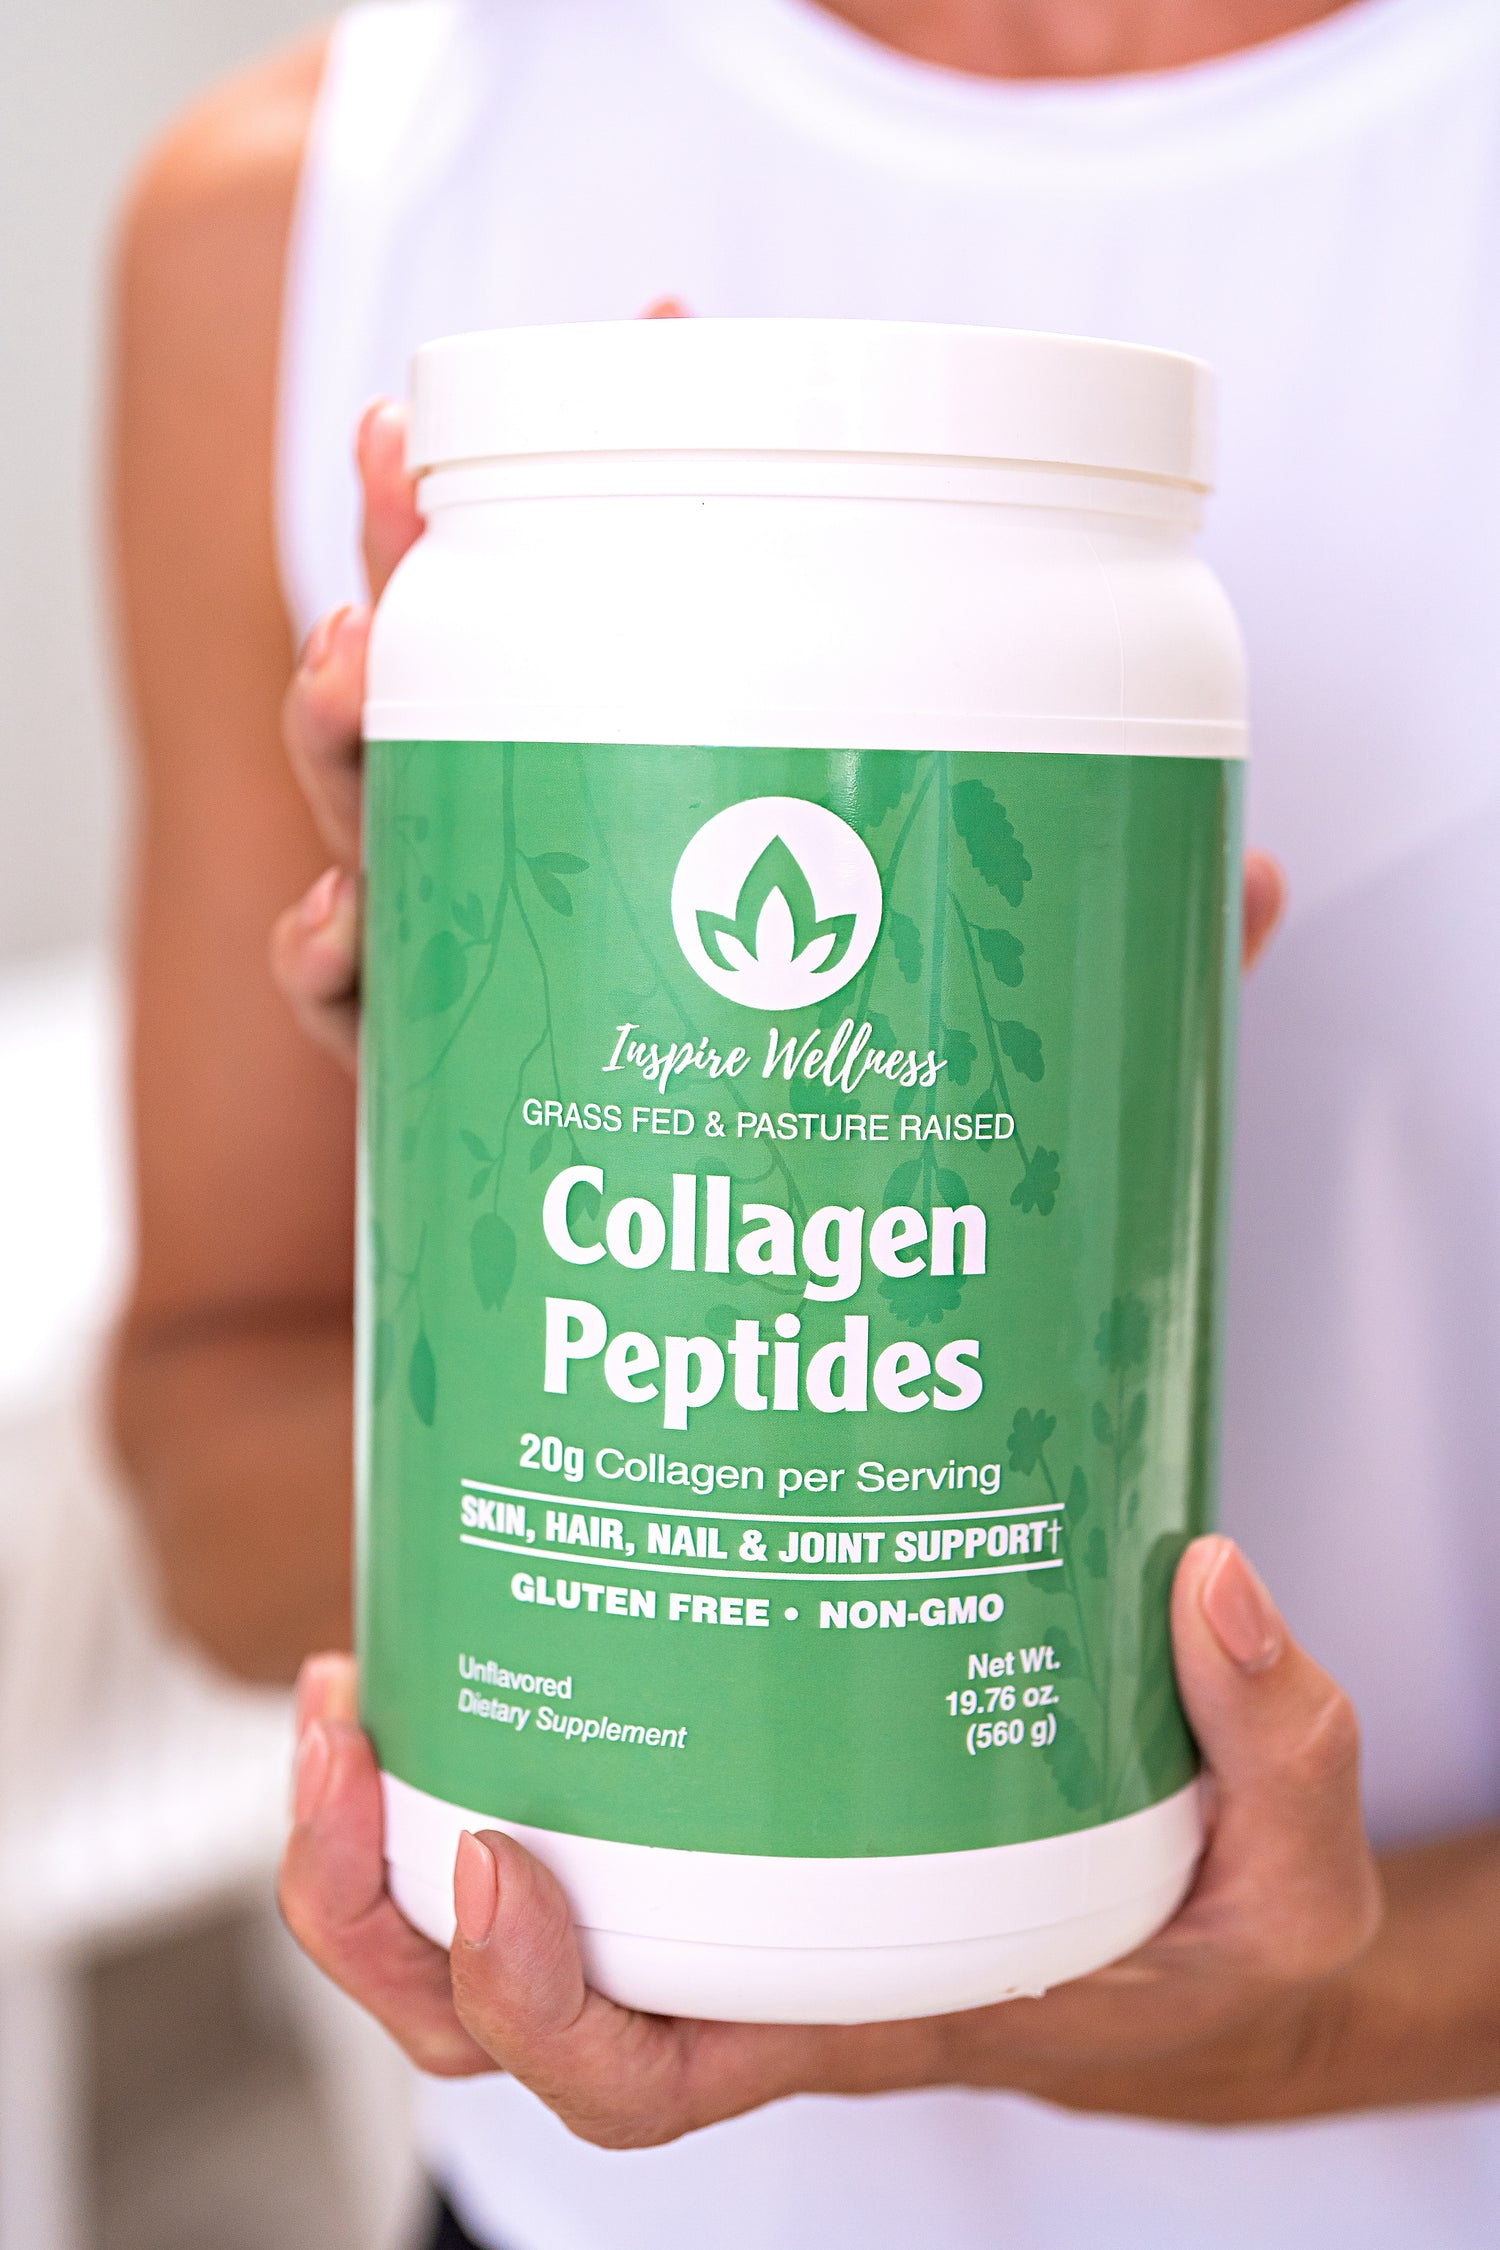 Why Inspire Wellness Unflavored Collagen is Superior